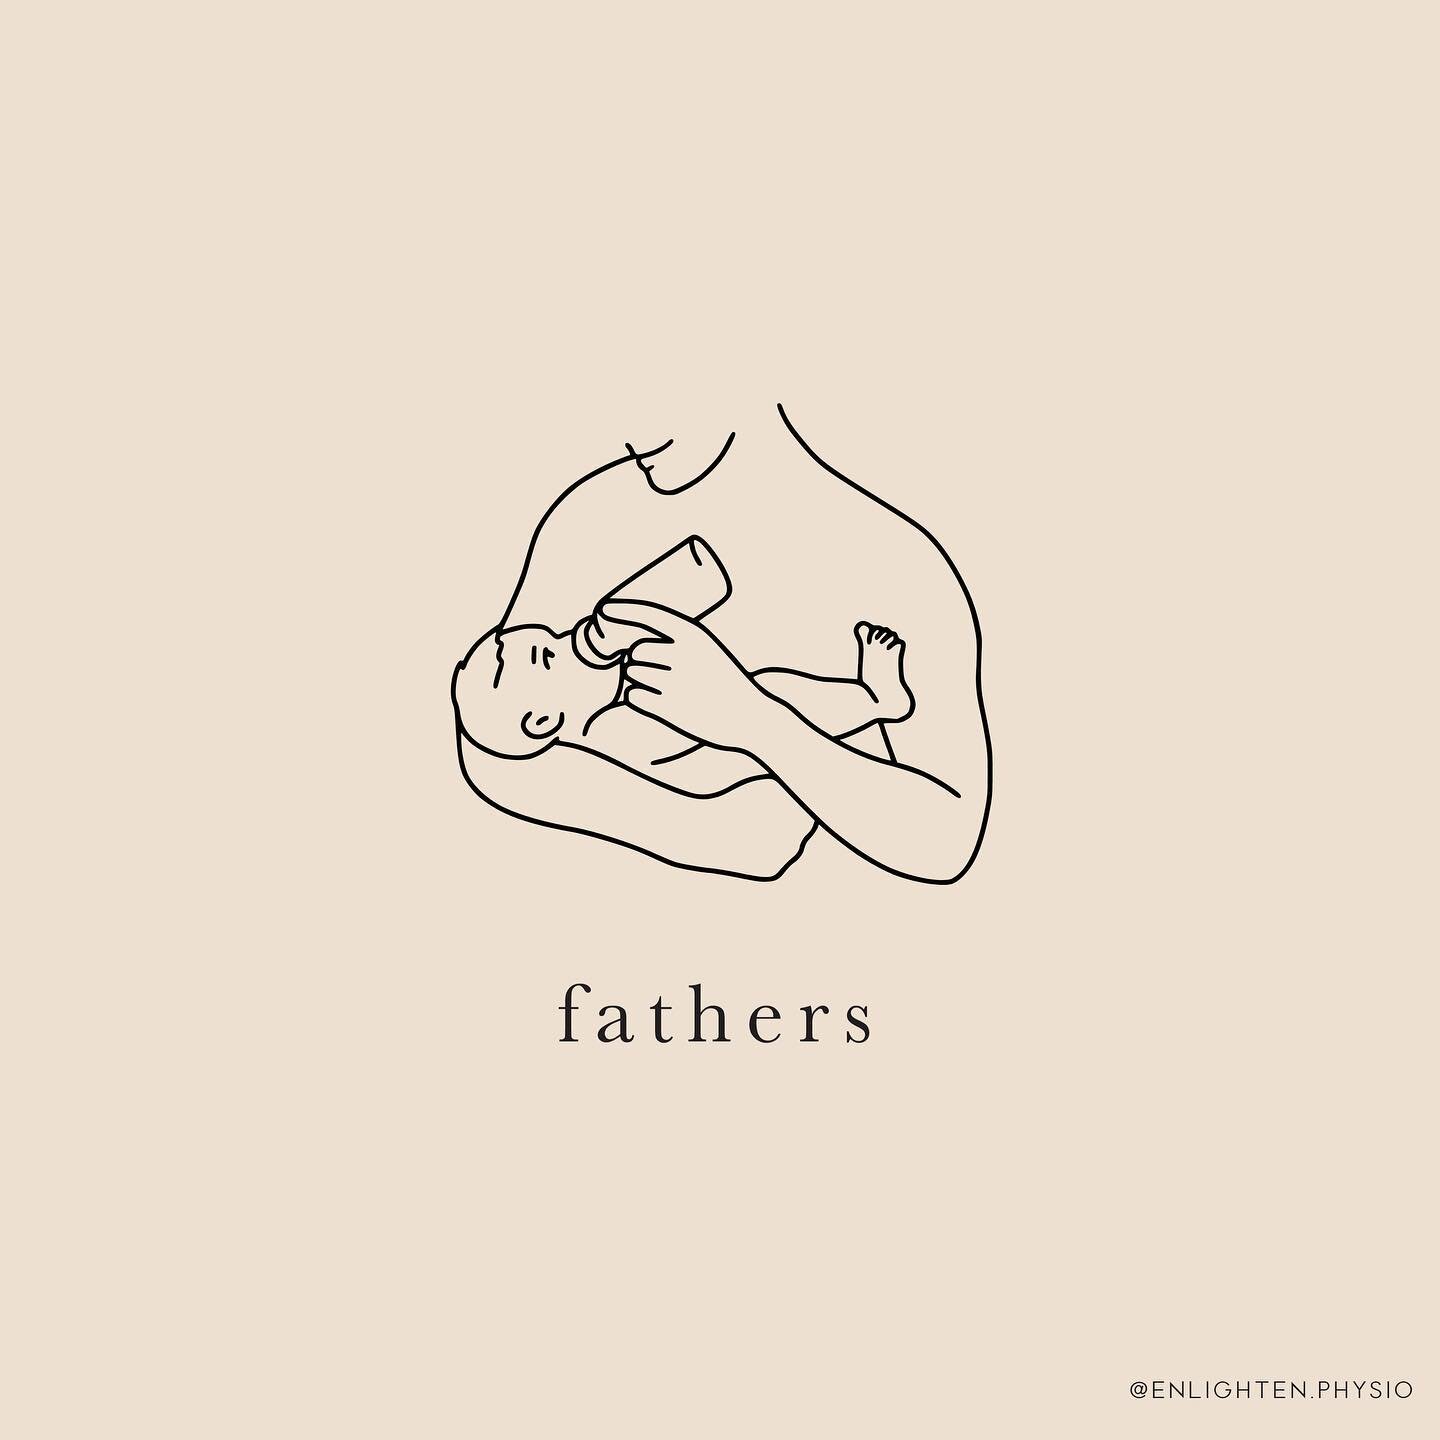 ✨Dads of Enlighten✨

Happy Father&rsquo;s Day to all of the Dads, Step-Dads, Dad-Figures, Uncles, Grandpas, Dads-to-be, Dad&rsquo;s of Fur Babies and all in between. 

Wishing you all a wonderful day  full of home made presents, brekkie in bed and lo